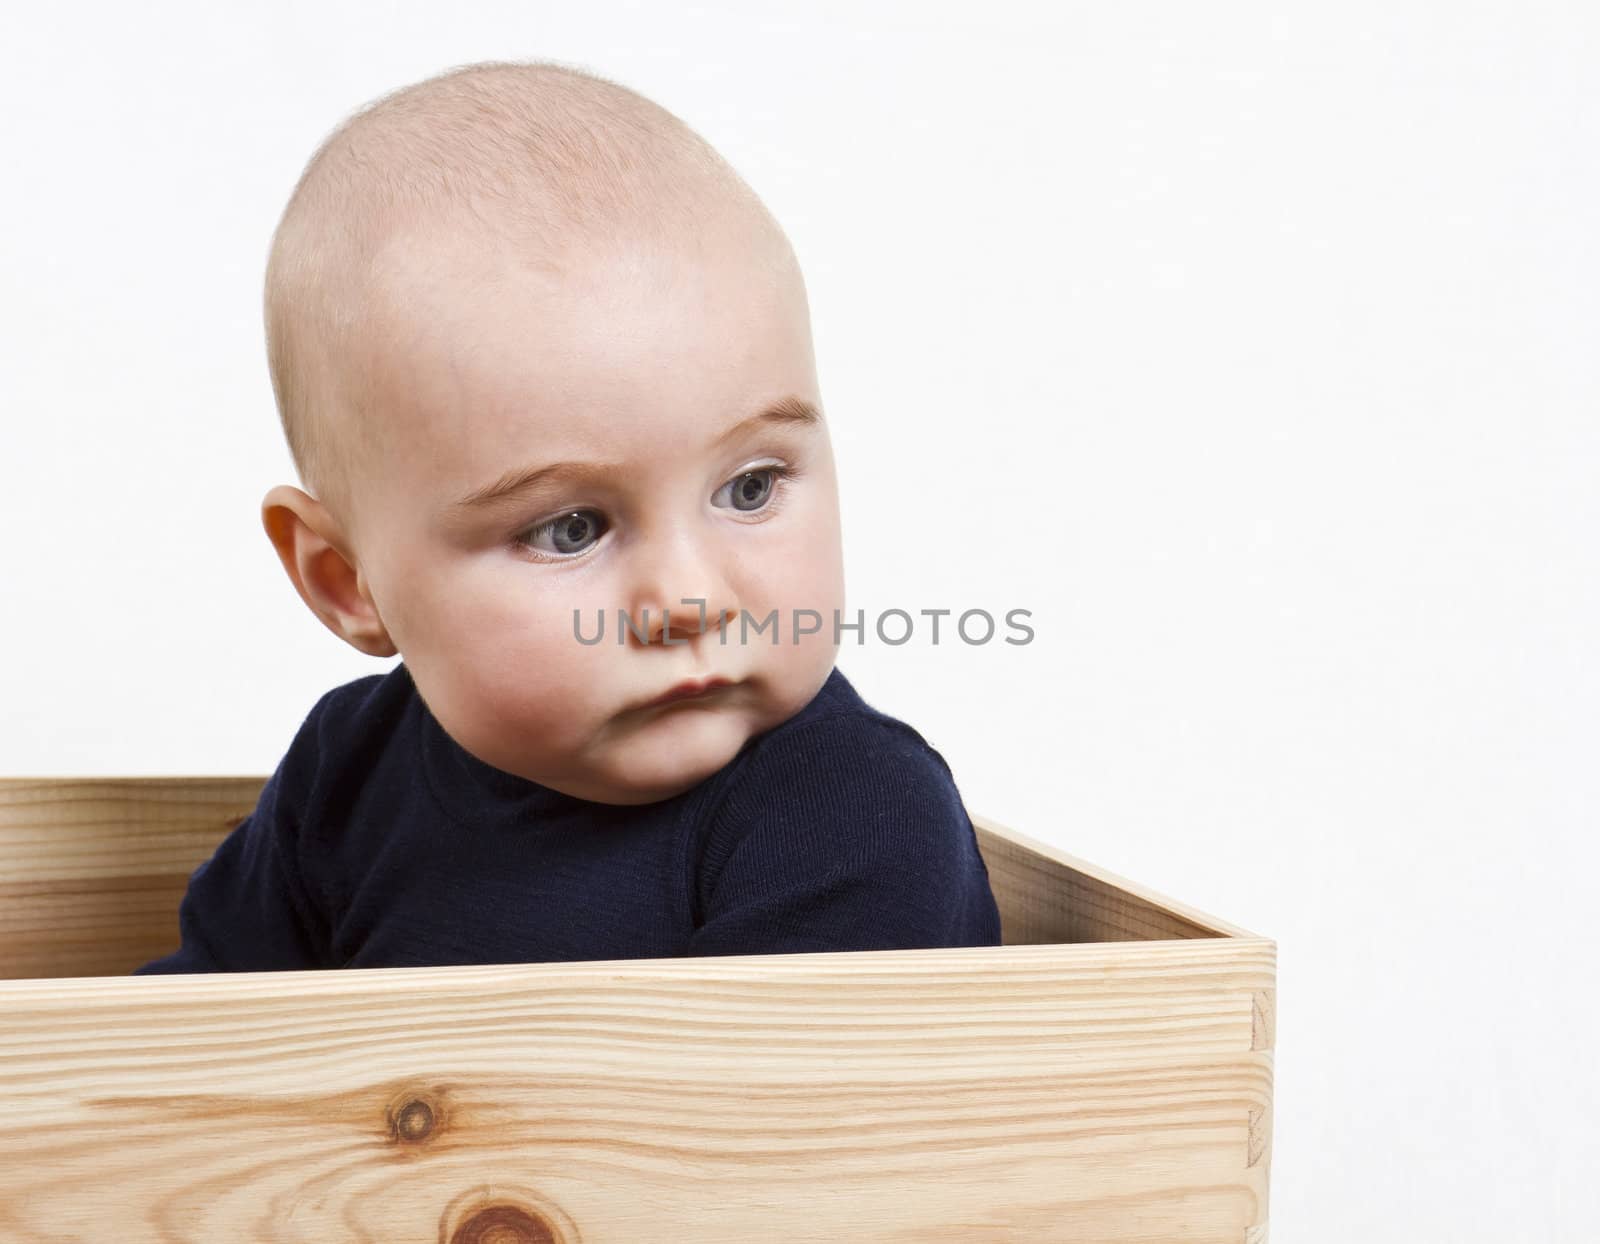 single toddler with dark shirt in wooden box looking to the right.